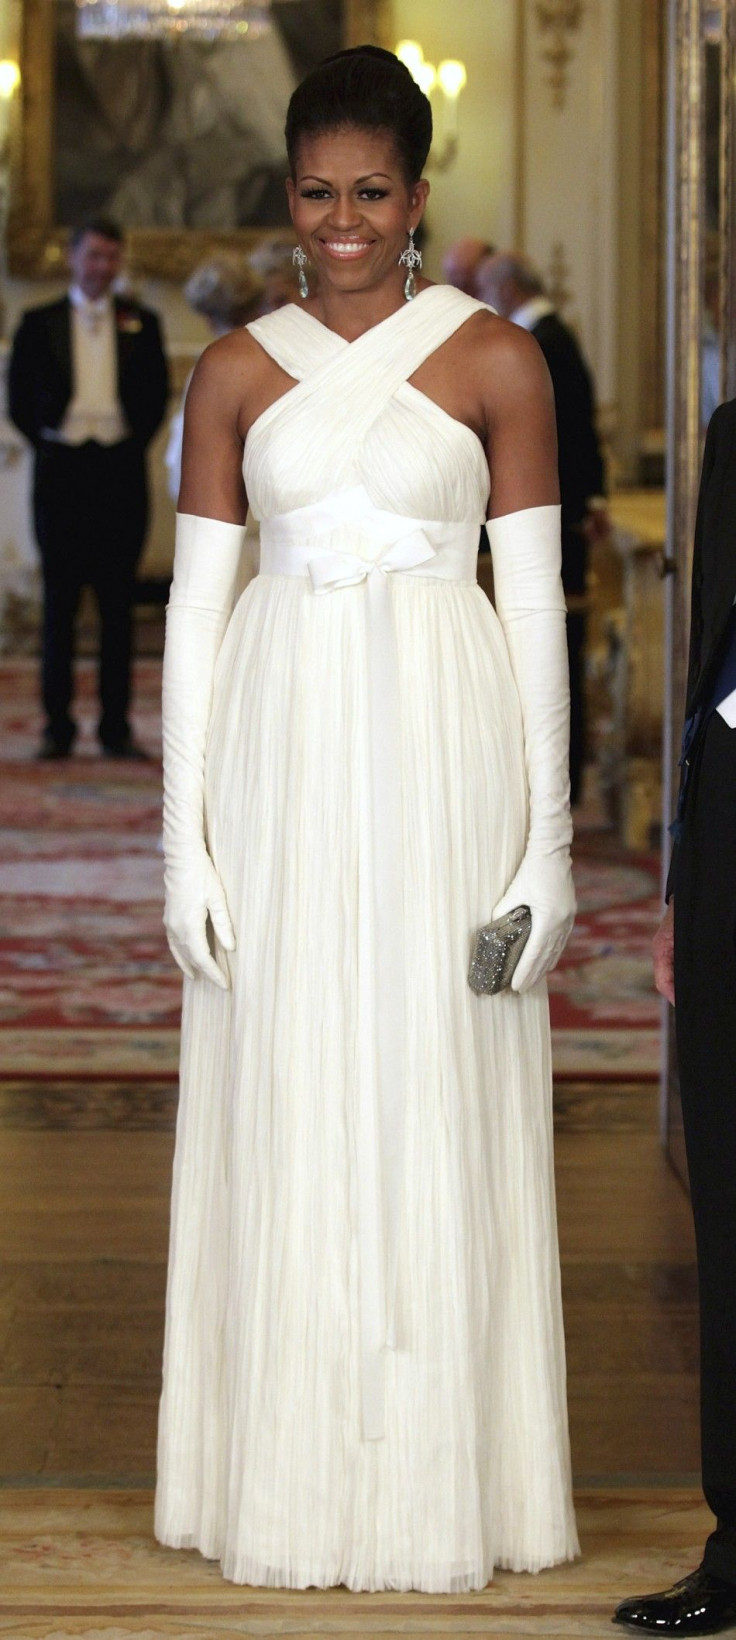 3. Michelle Obama’s Top 10 Looks For the Year 2011 